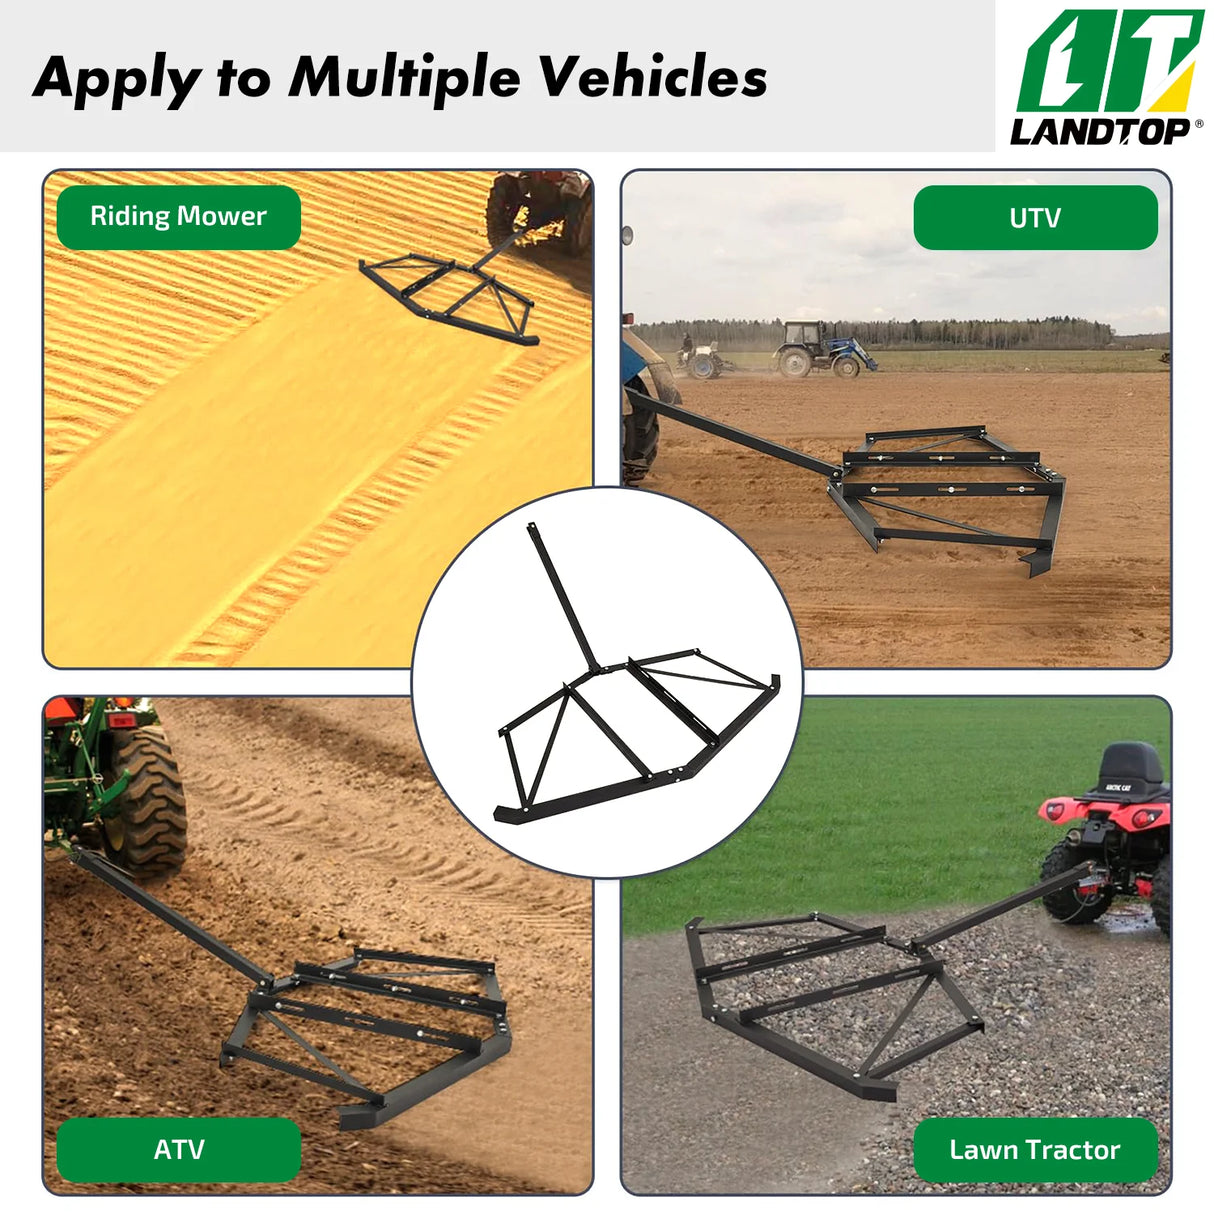 Driveway Drag 66" Width, Driveway Drag Grader w/ 3 Sets Adjustable Bolts & 2 Reinforcement Bars, Tow Behind Drag Harrow with Pin-Style Hitch, Garden Lawn Tractor Driveway Grader for ATVs, UTV